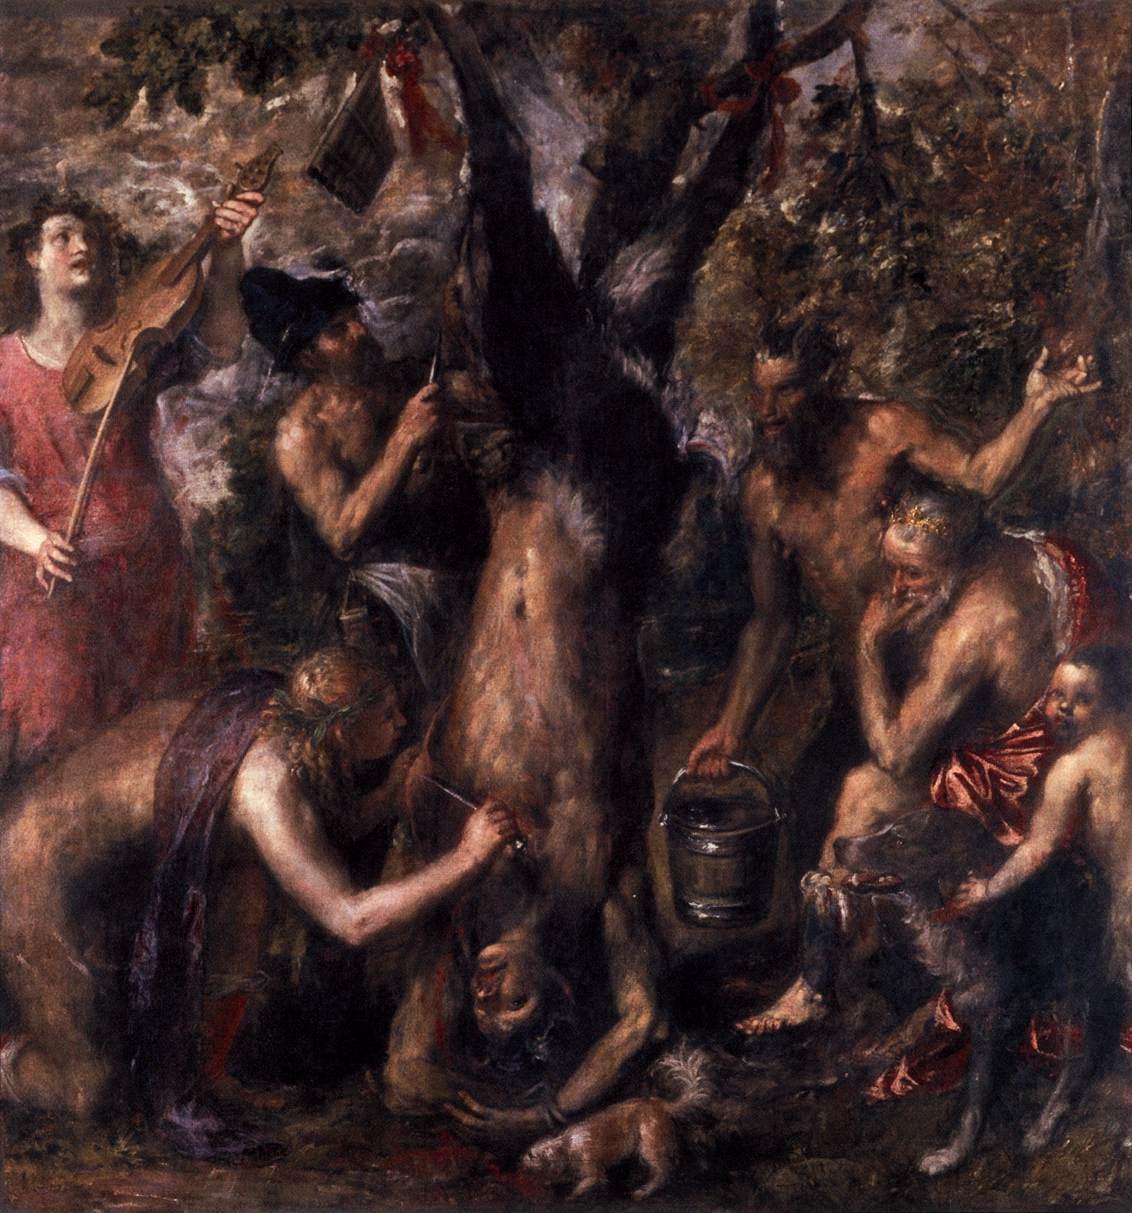 The Flaying of Marsyas, one of Titian's last works (1570's) illustrates Ovid's myth of the satyr Marsyas being skinned alive by the god Apollo after unsuccessfully challenging him to a musical battle. – Archidiocese Olomouc, Archiepiscopal Palace, Picture Gallery